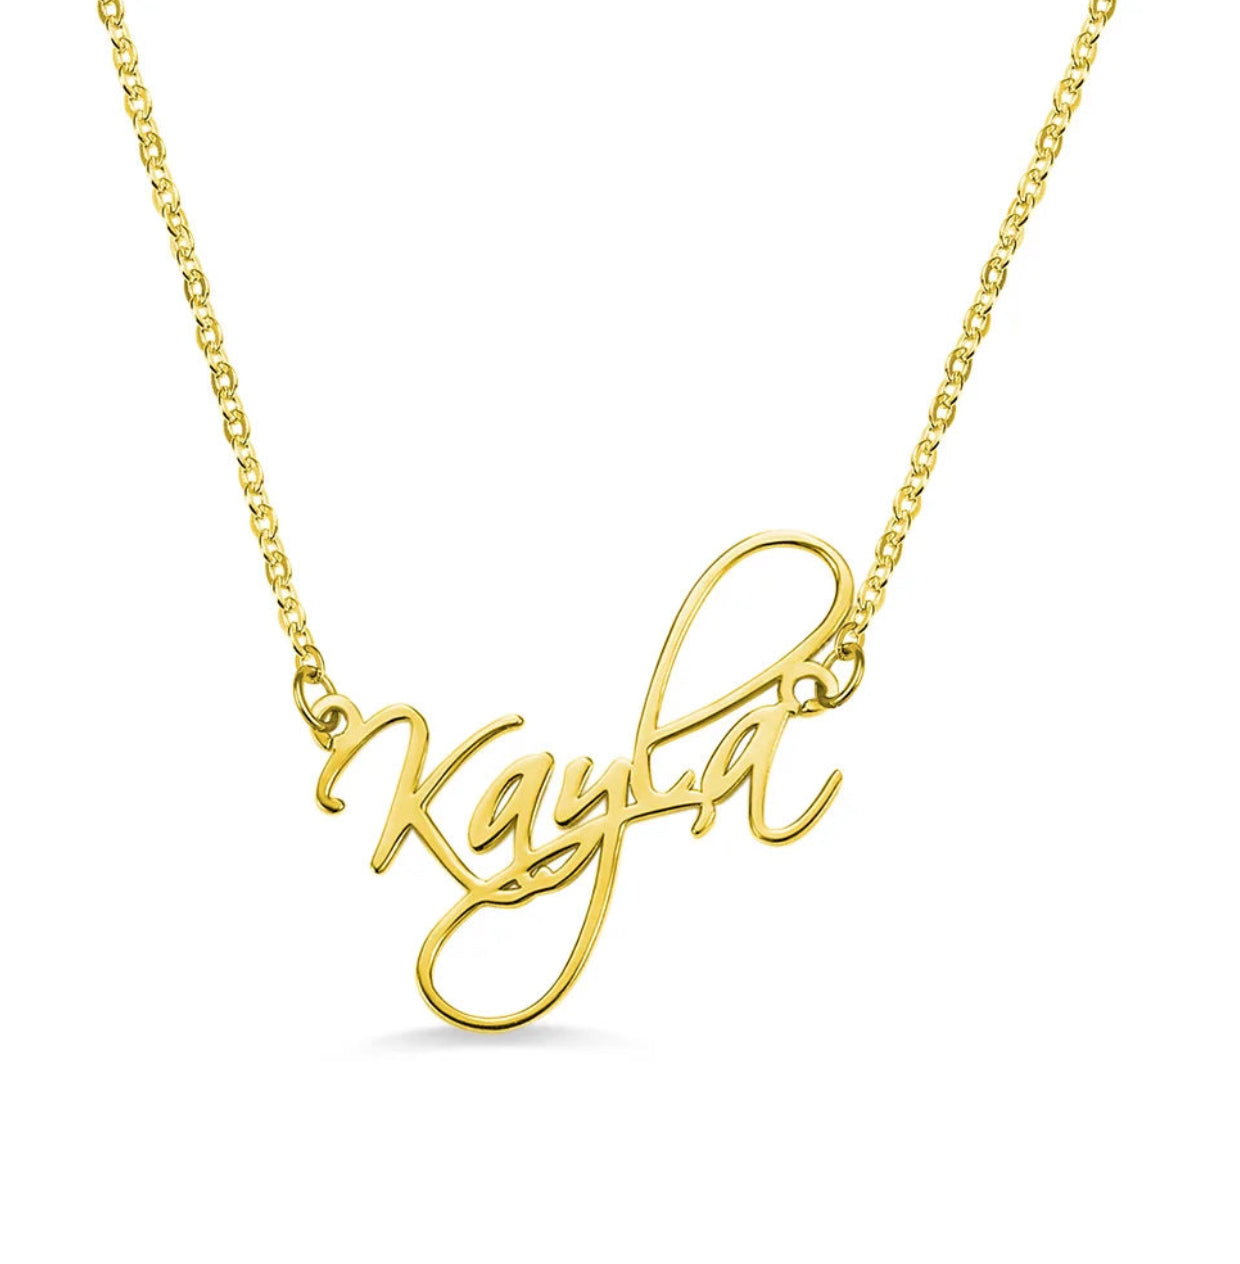 Modern Name Necklace